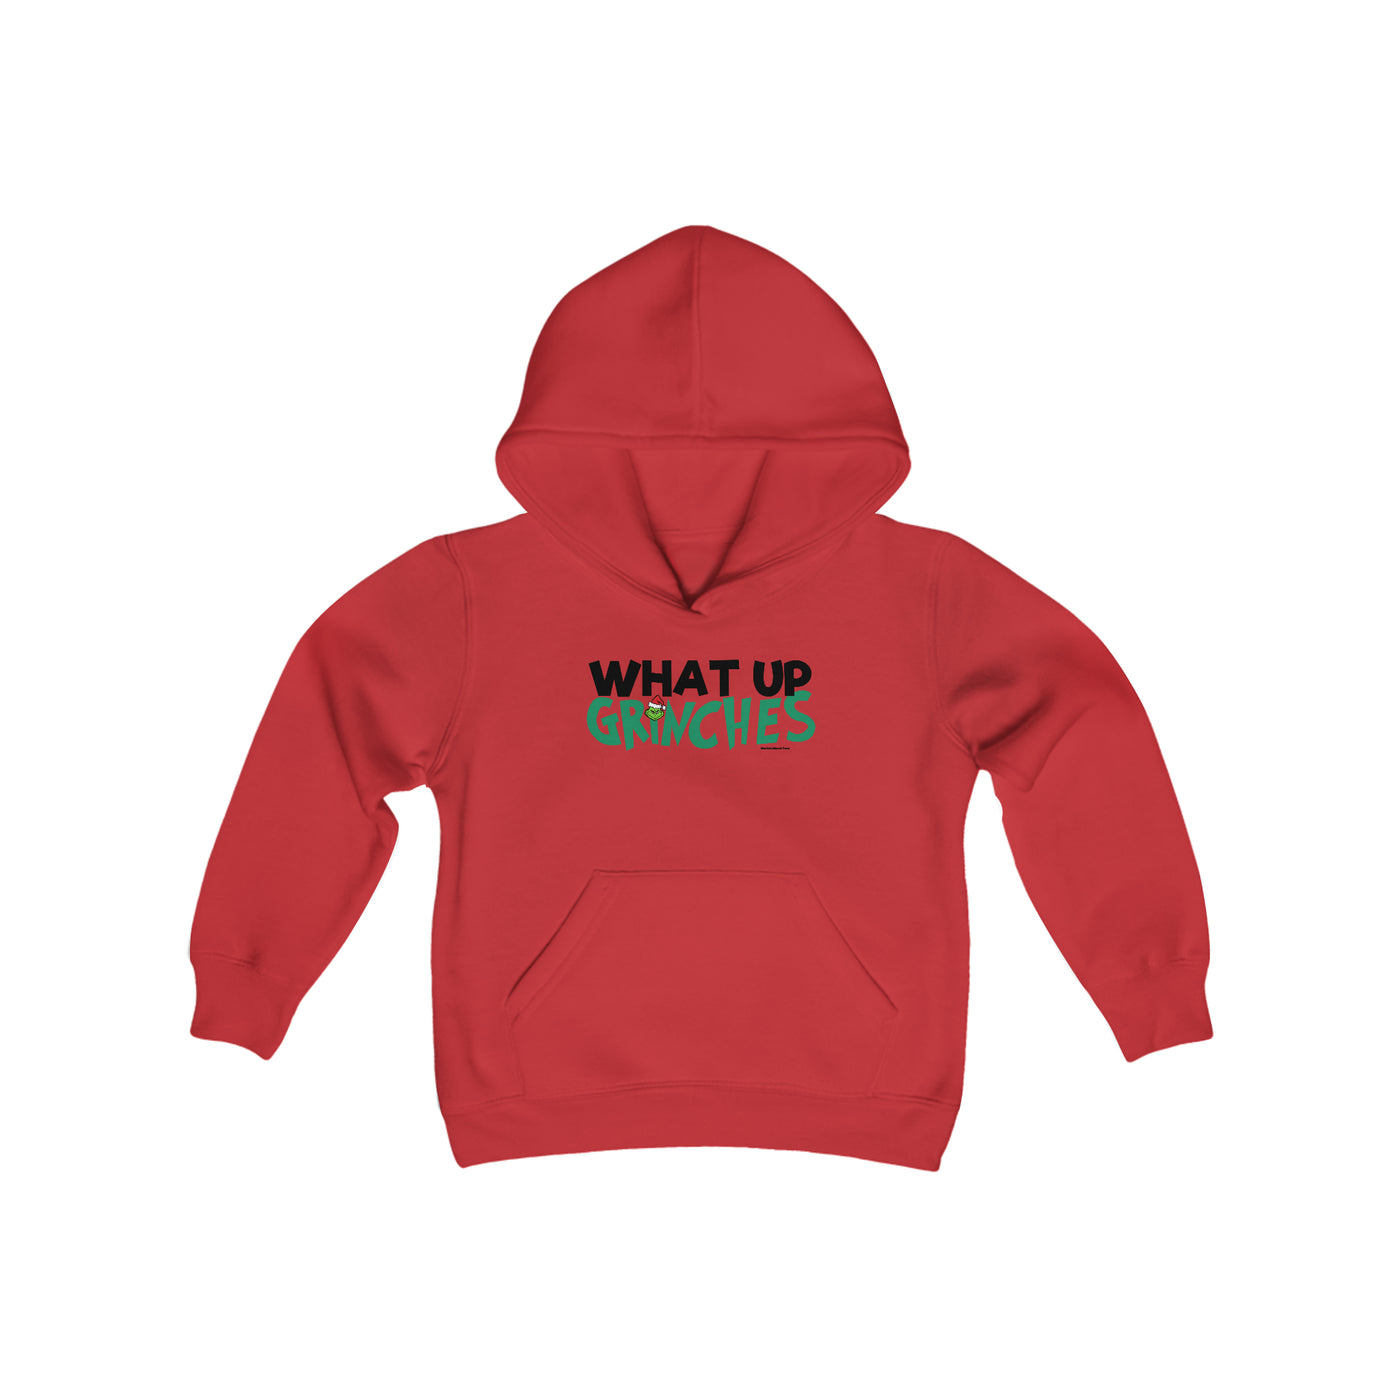 What up Grinches Youth Hoodie